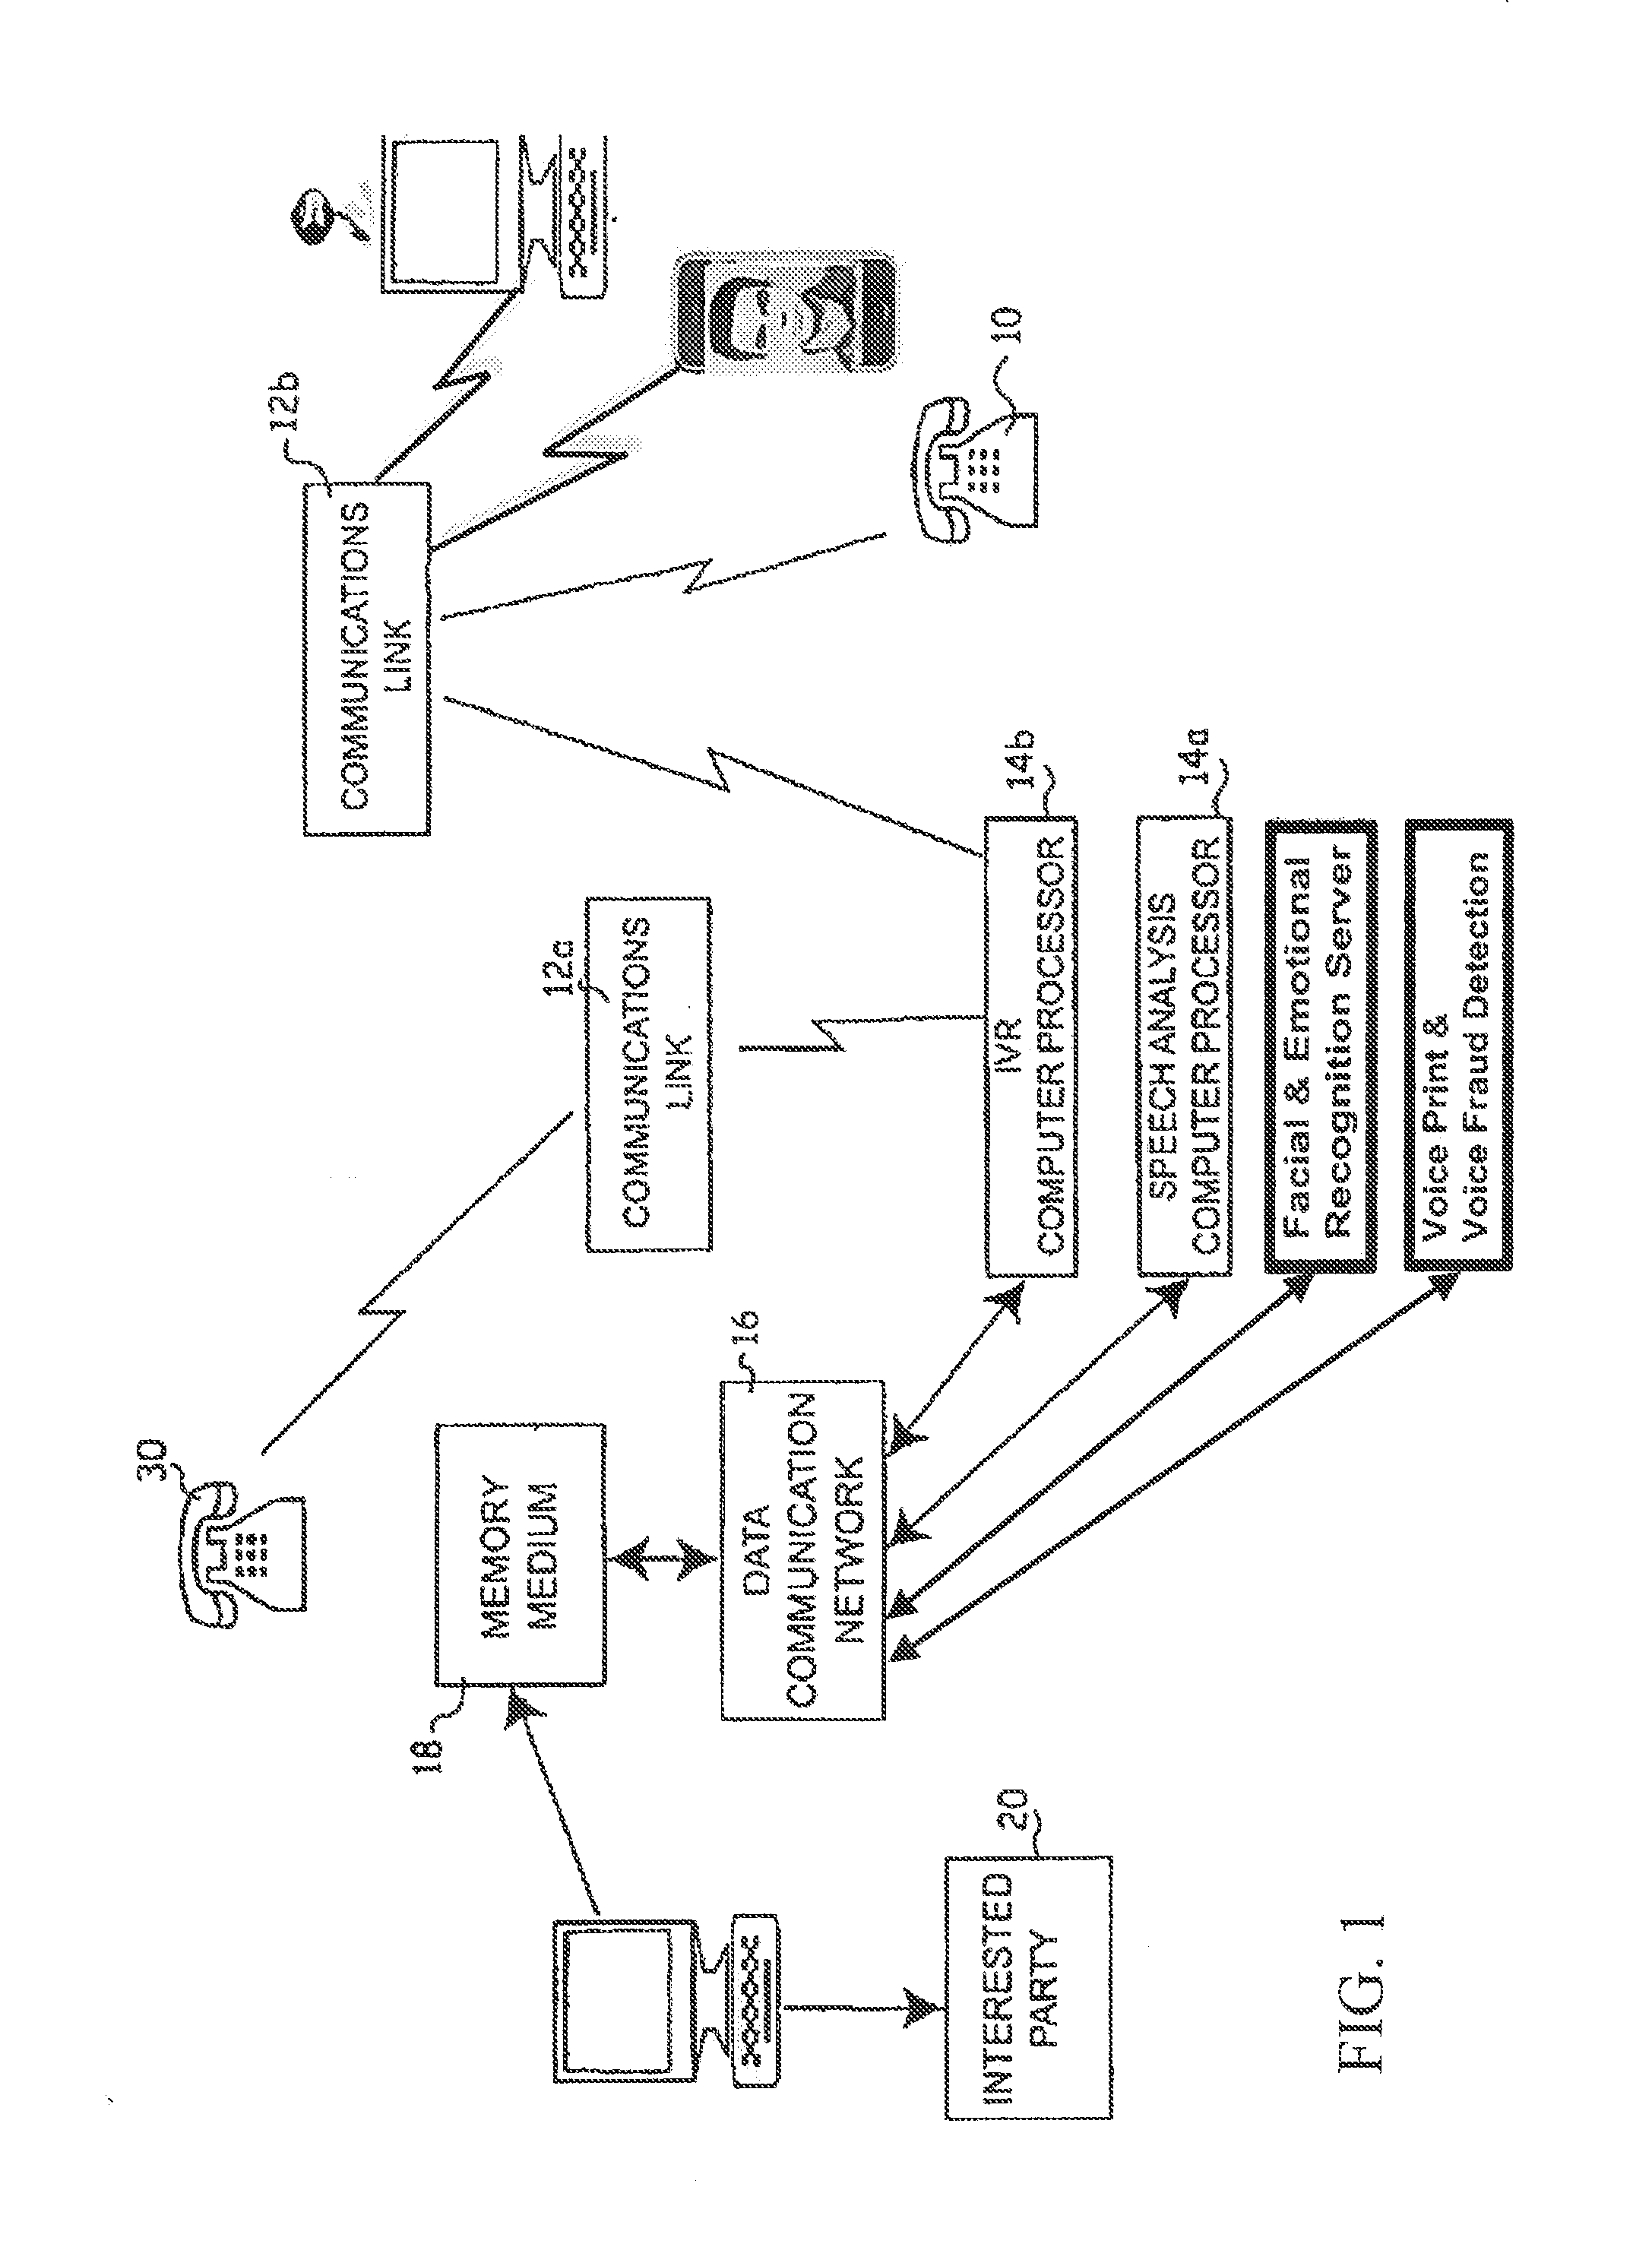 User intent analysis extent of speaker intent analysis system